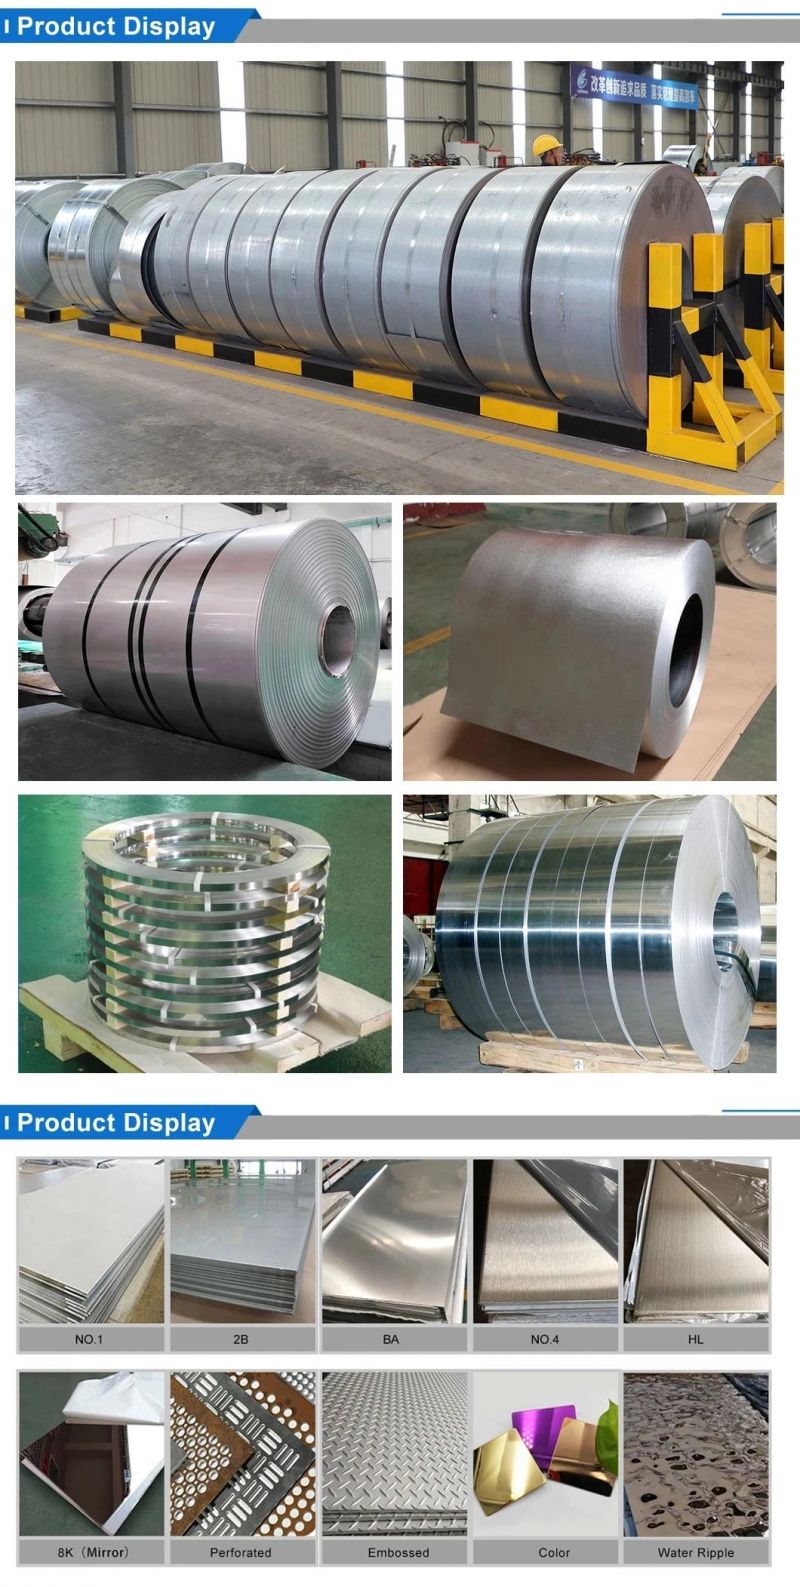 China Roofing Materials/Hot Dipped Galvanized Steel Coils